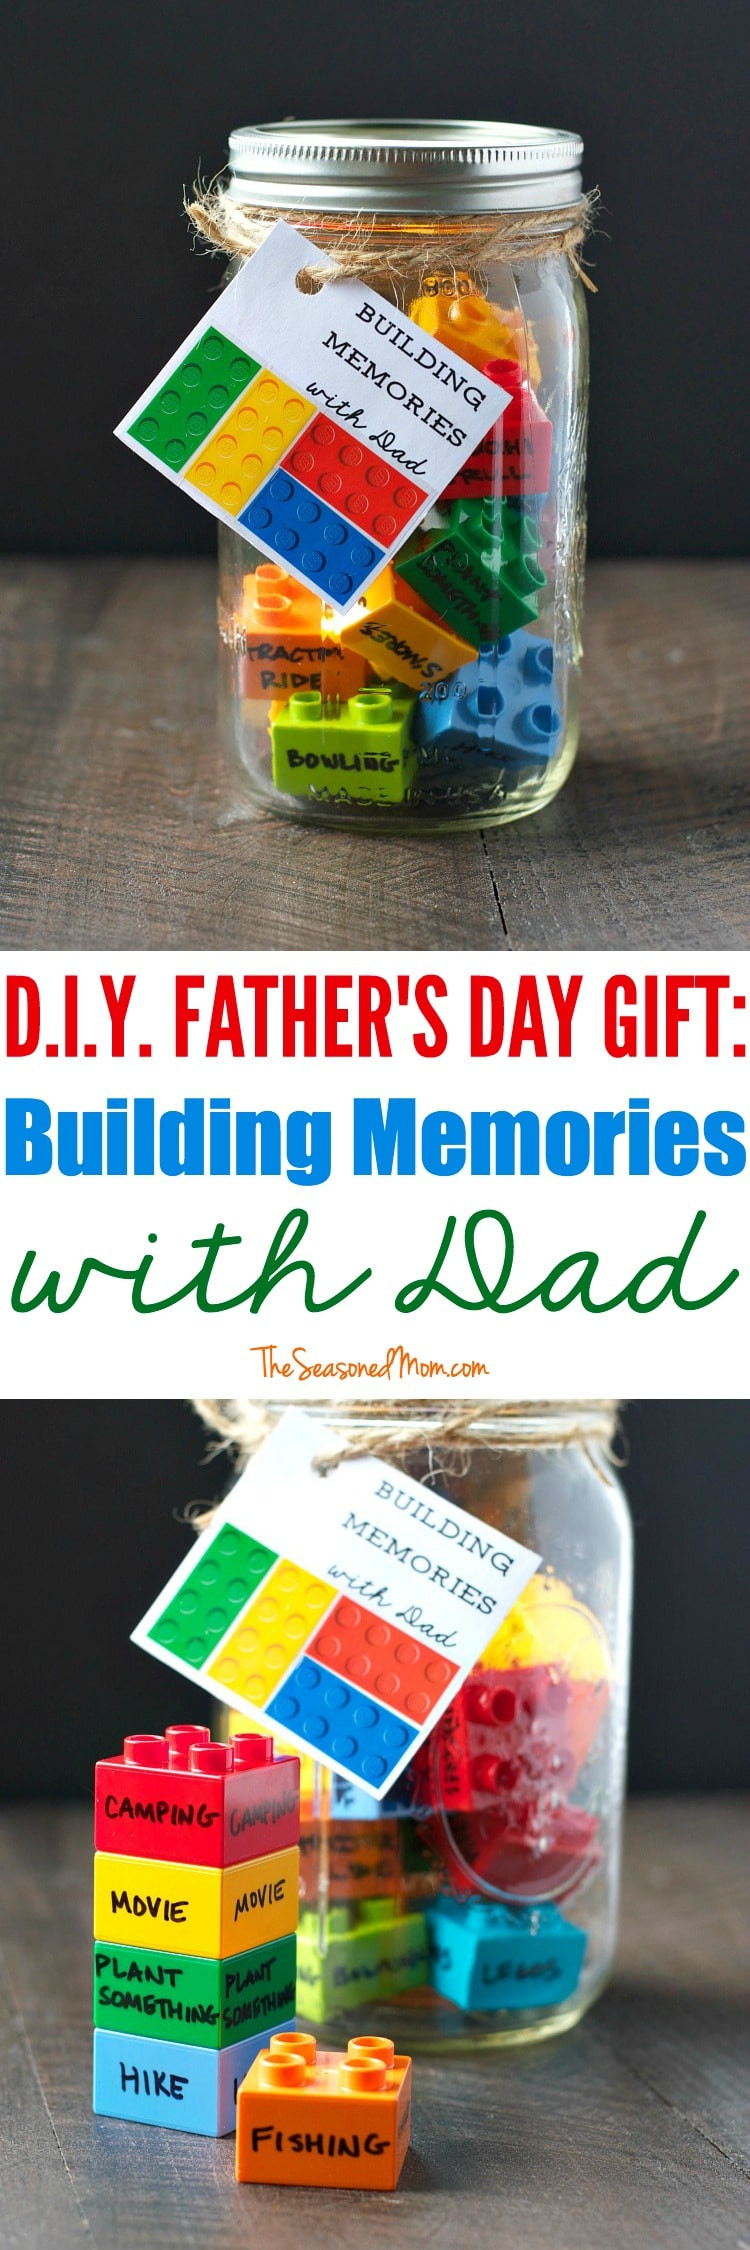 DIY Fathers Day Gifts From Kids
 25 Homemade Father s Day Gifts from Kids That Dad Can